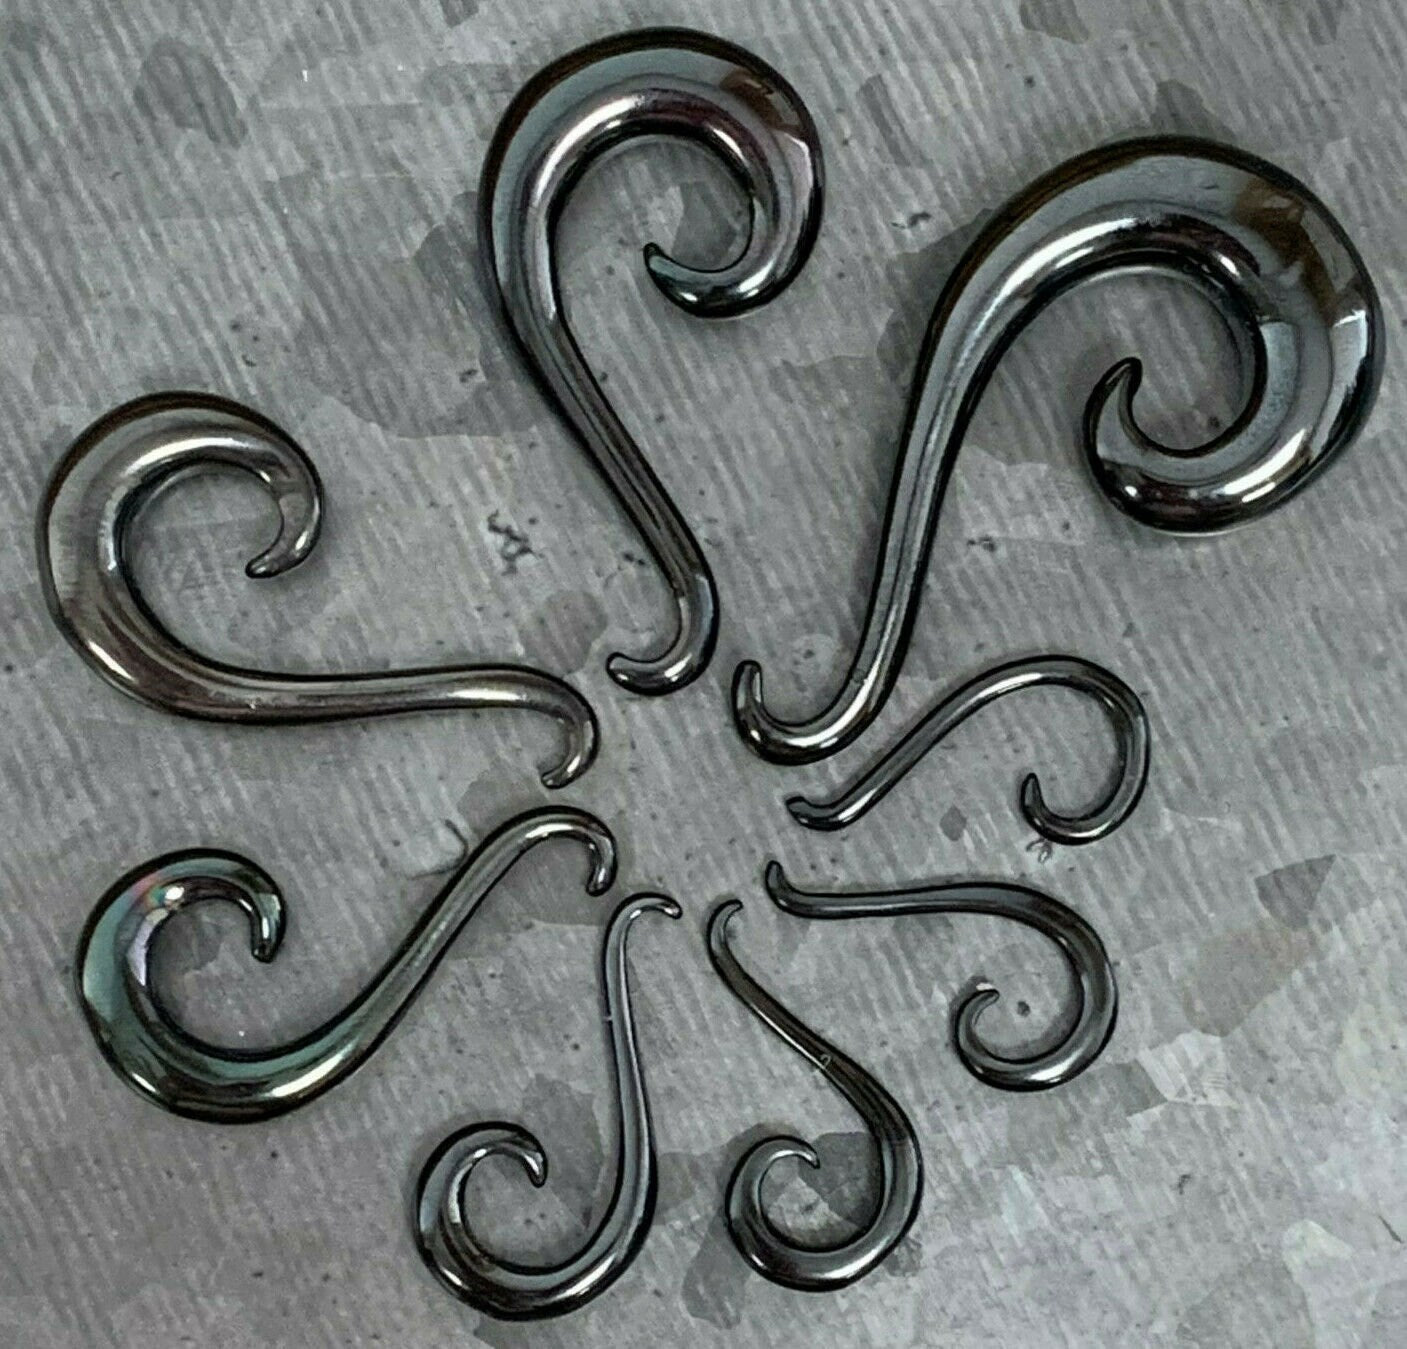 PAIR of Unique Black Swirl Hook Steel Spiral Tapers Gauges 14g (1.6mm) thru 2g (6mm) available!